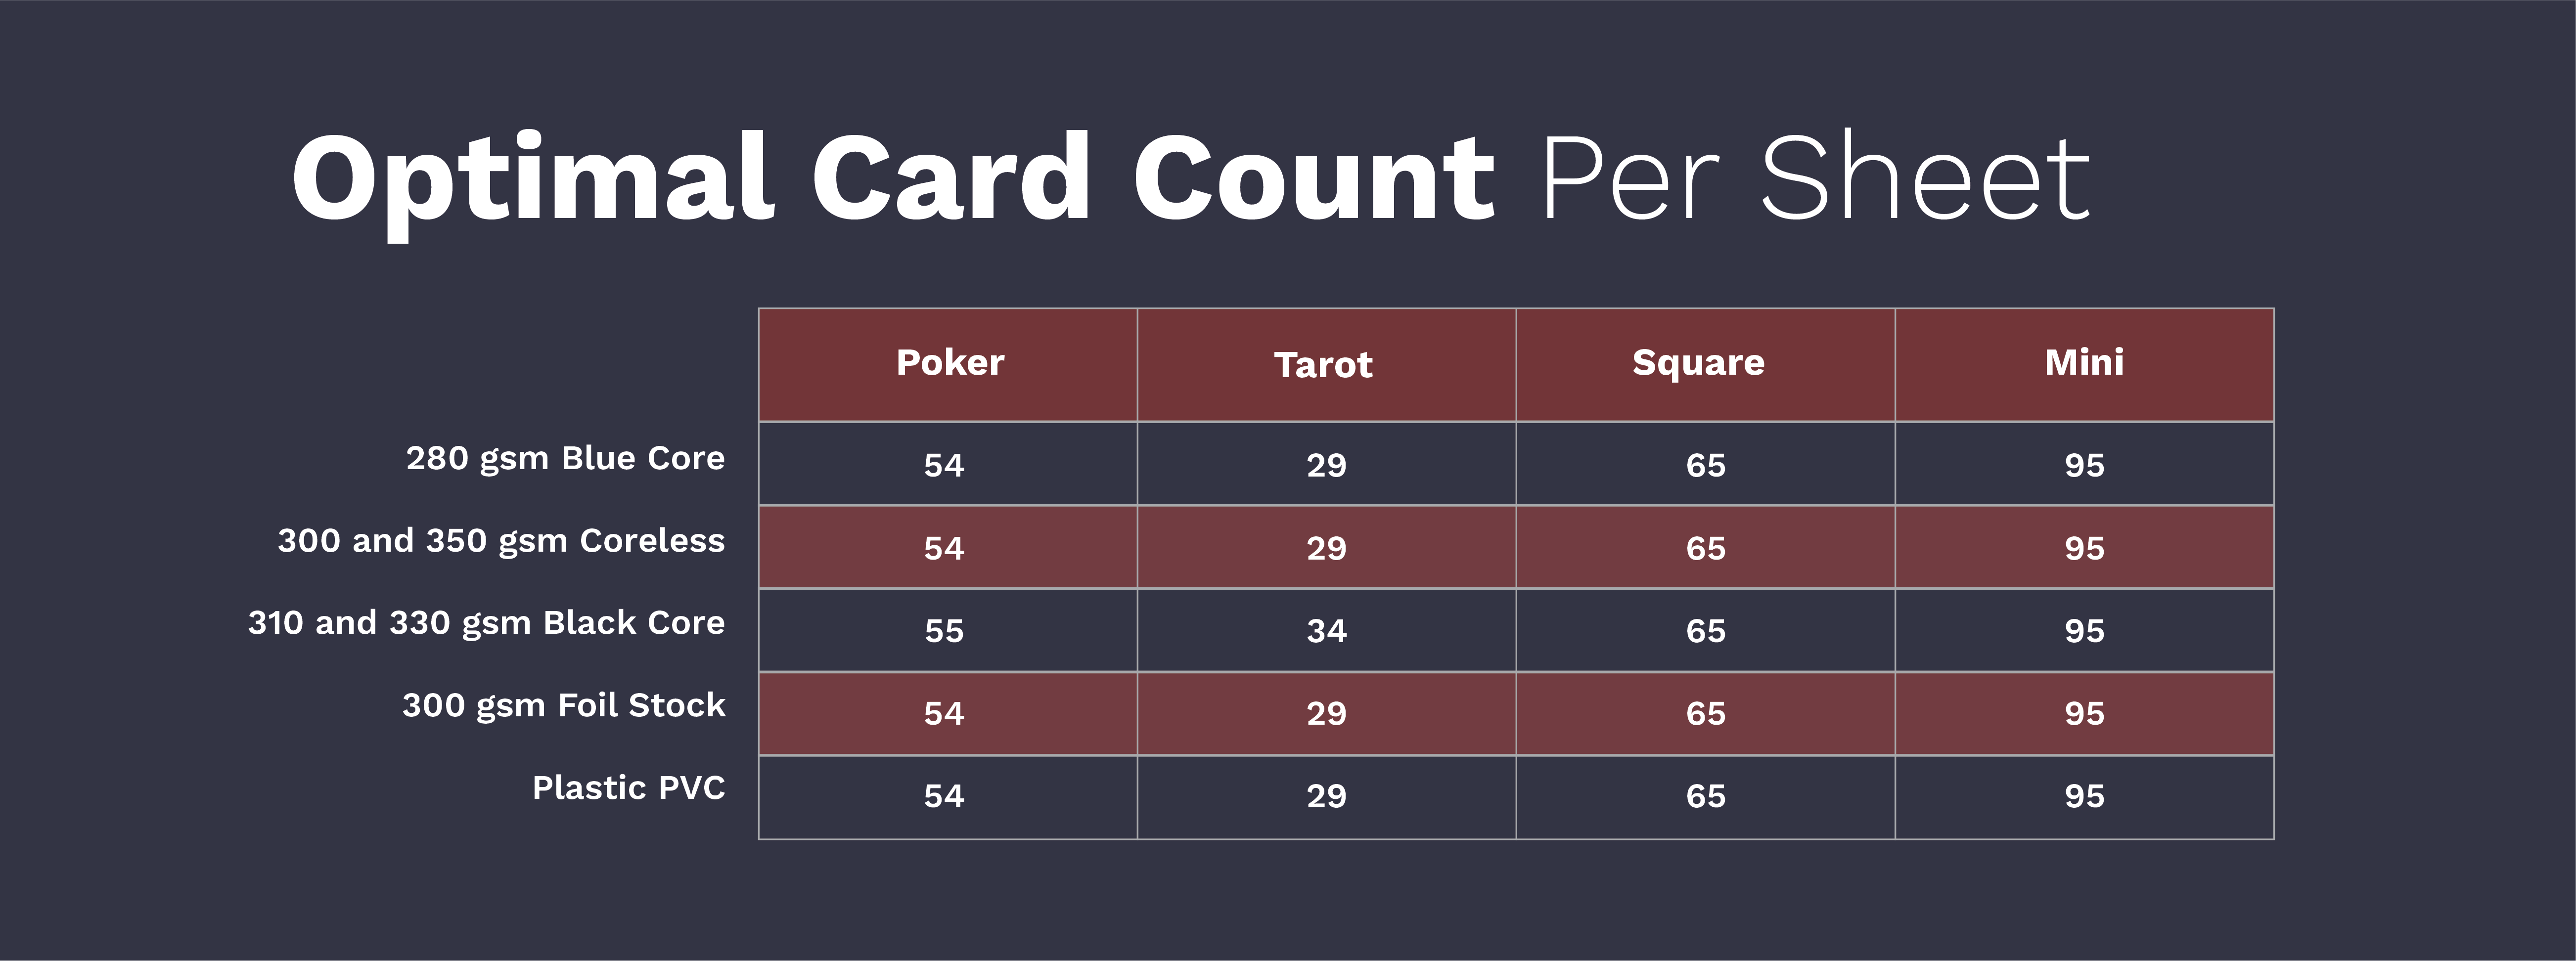 Optimal Card Count Graphic